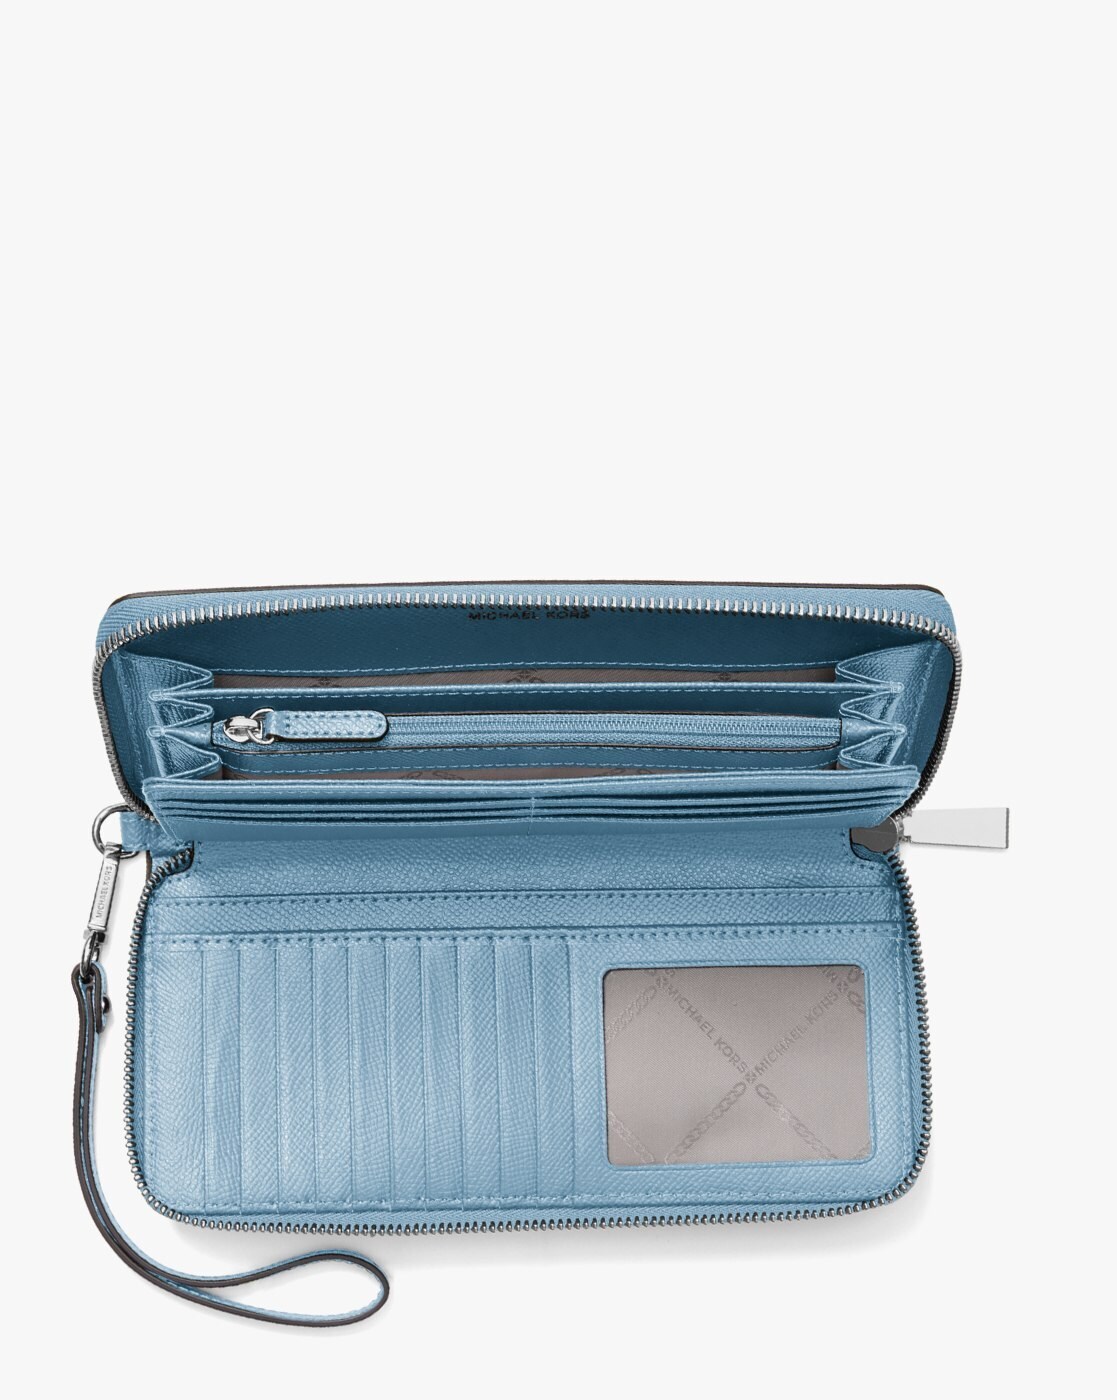 Copley Large Zip Continental Wallet in Light Gray